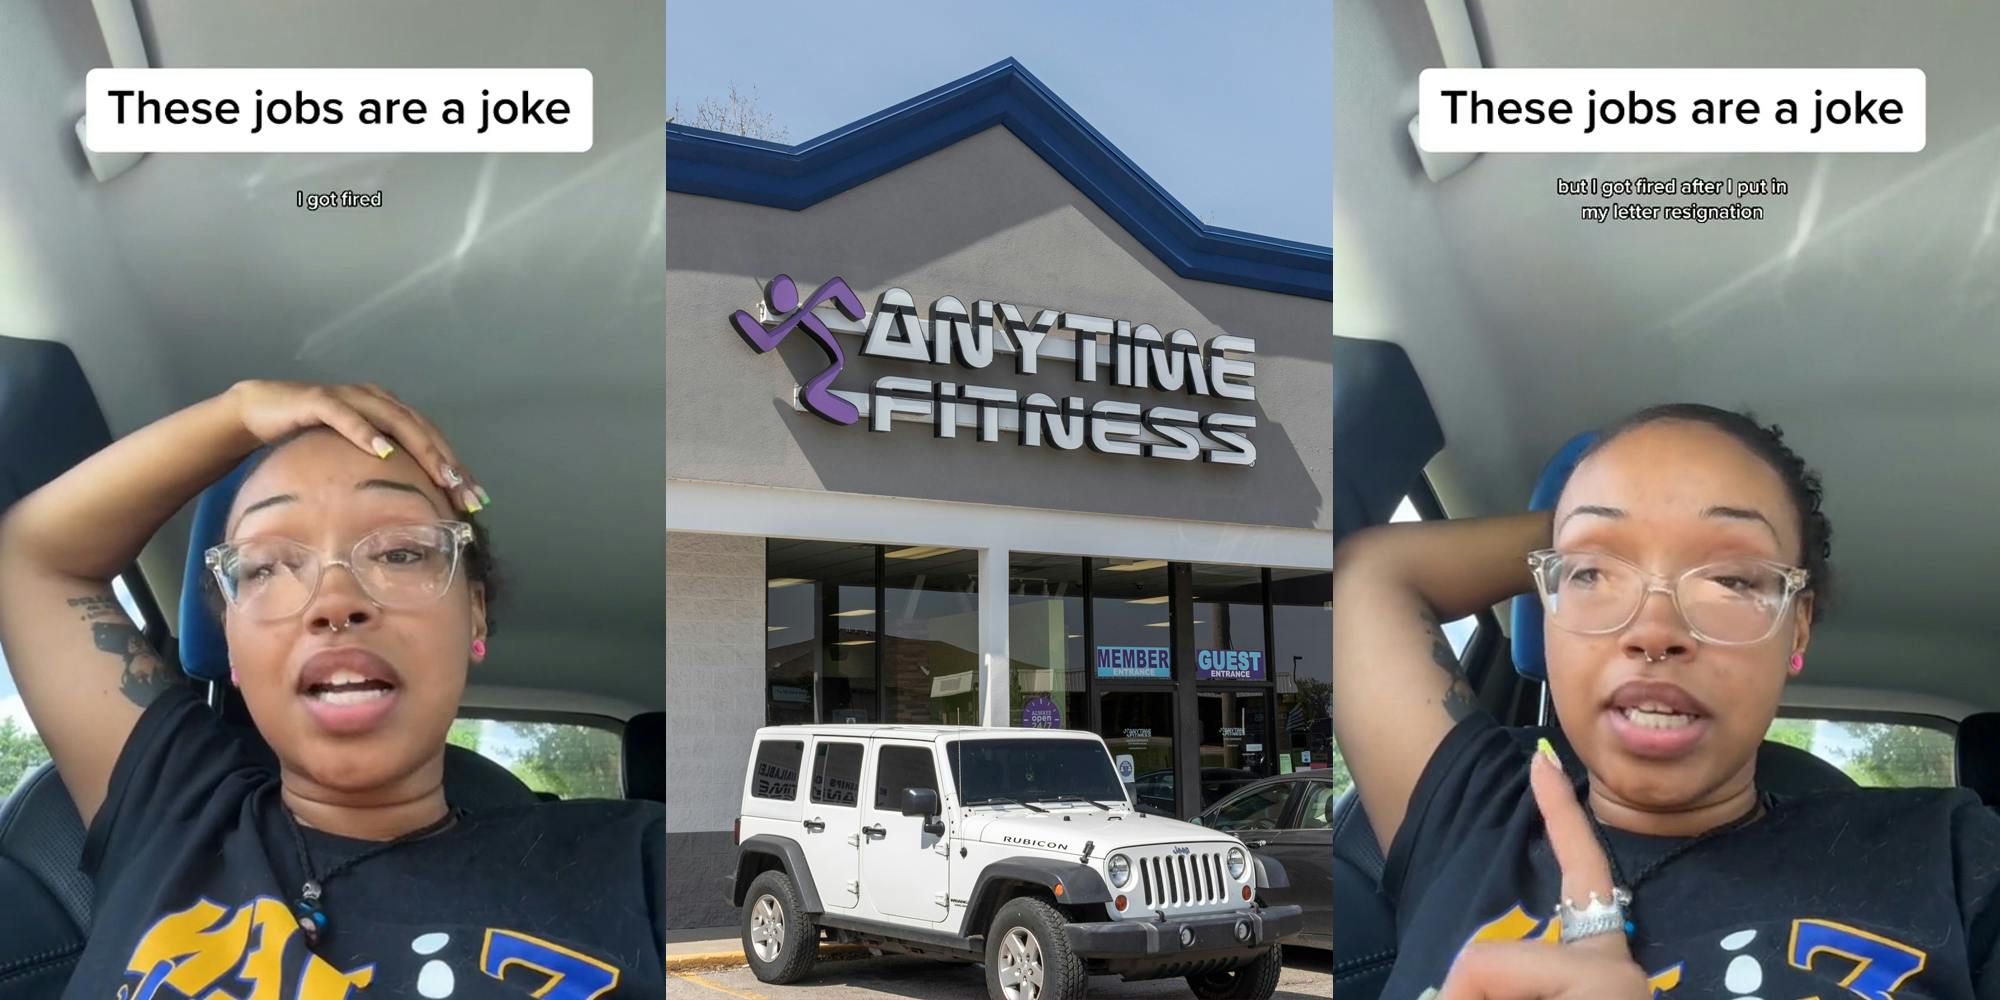 former Anytime Fitness employee speaking in car with caption "These jobs are a joke" "I got fired" (l) Anytime Fitness building with sign (c) former Anytime Fitness employee speaking in car with caption "These jobs are a joke" "but I got fired after I put in my letter resignation" (r)